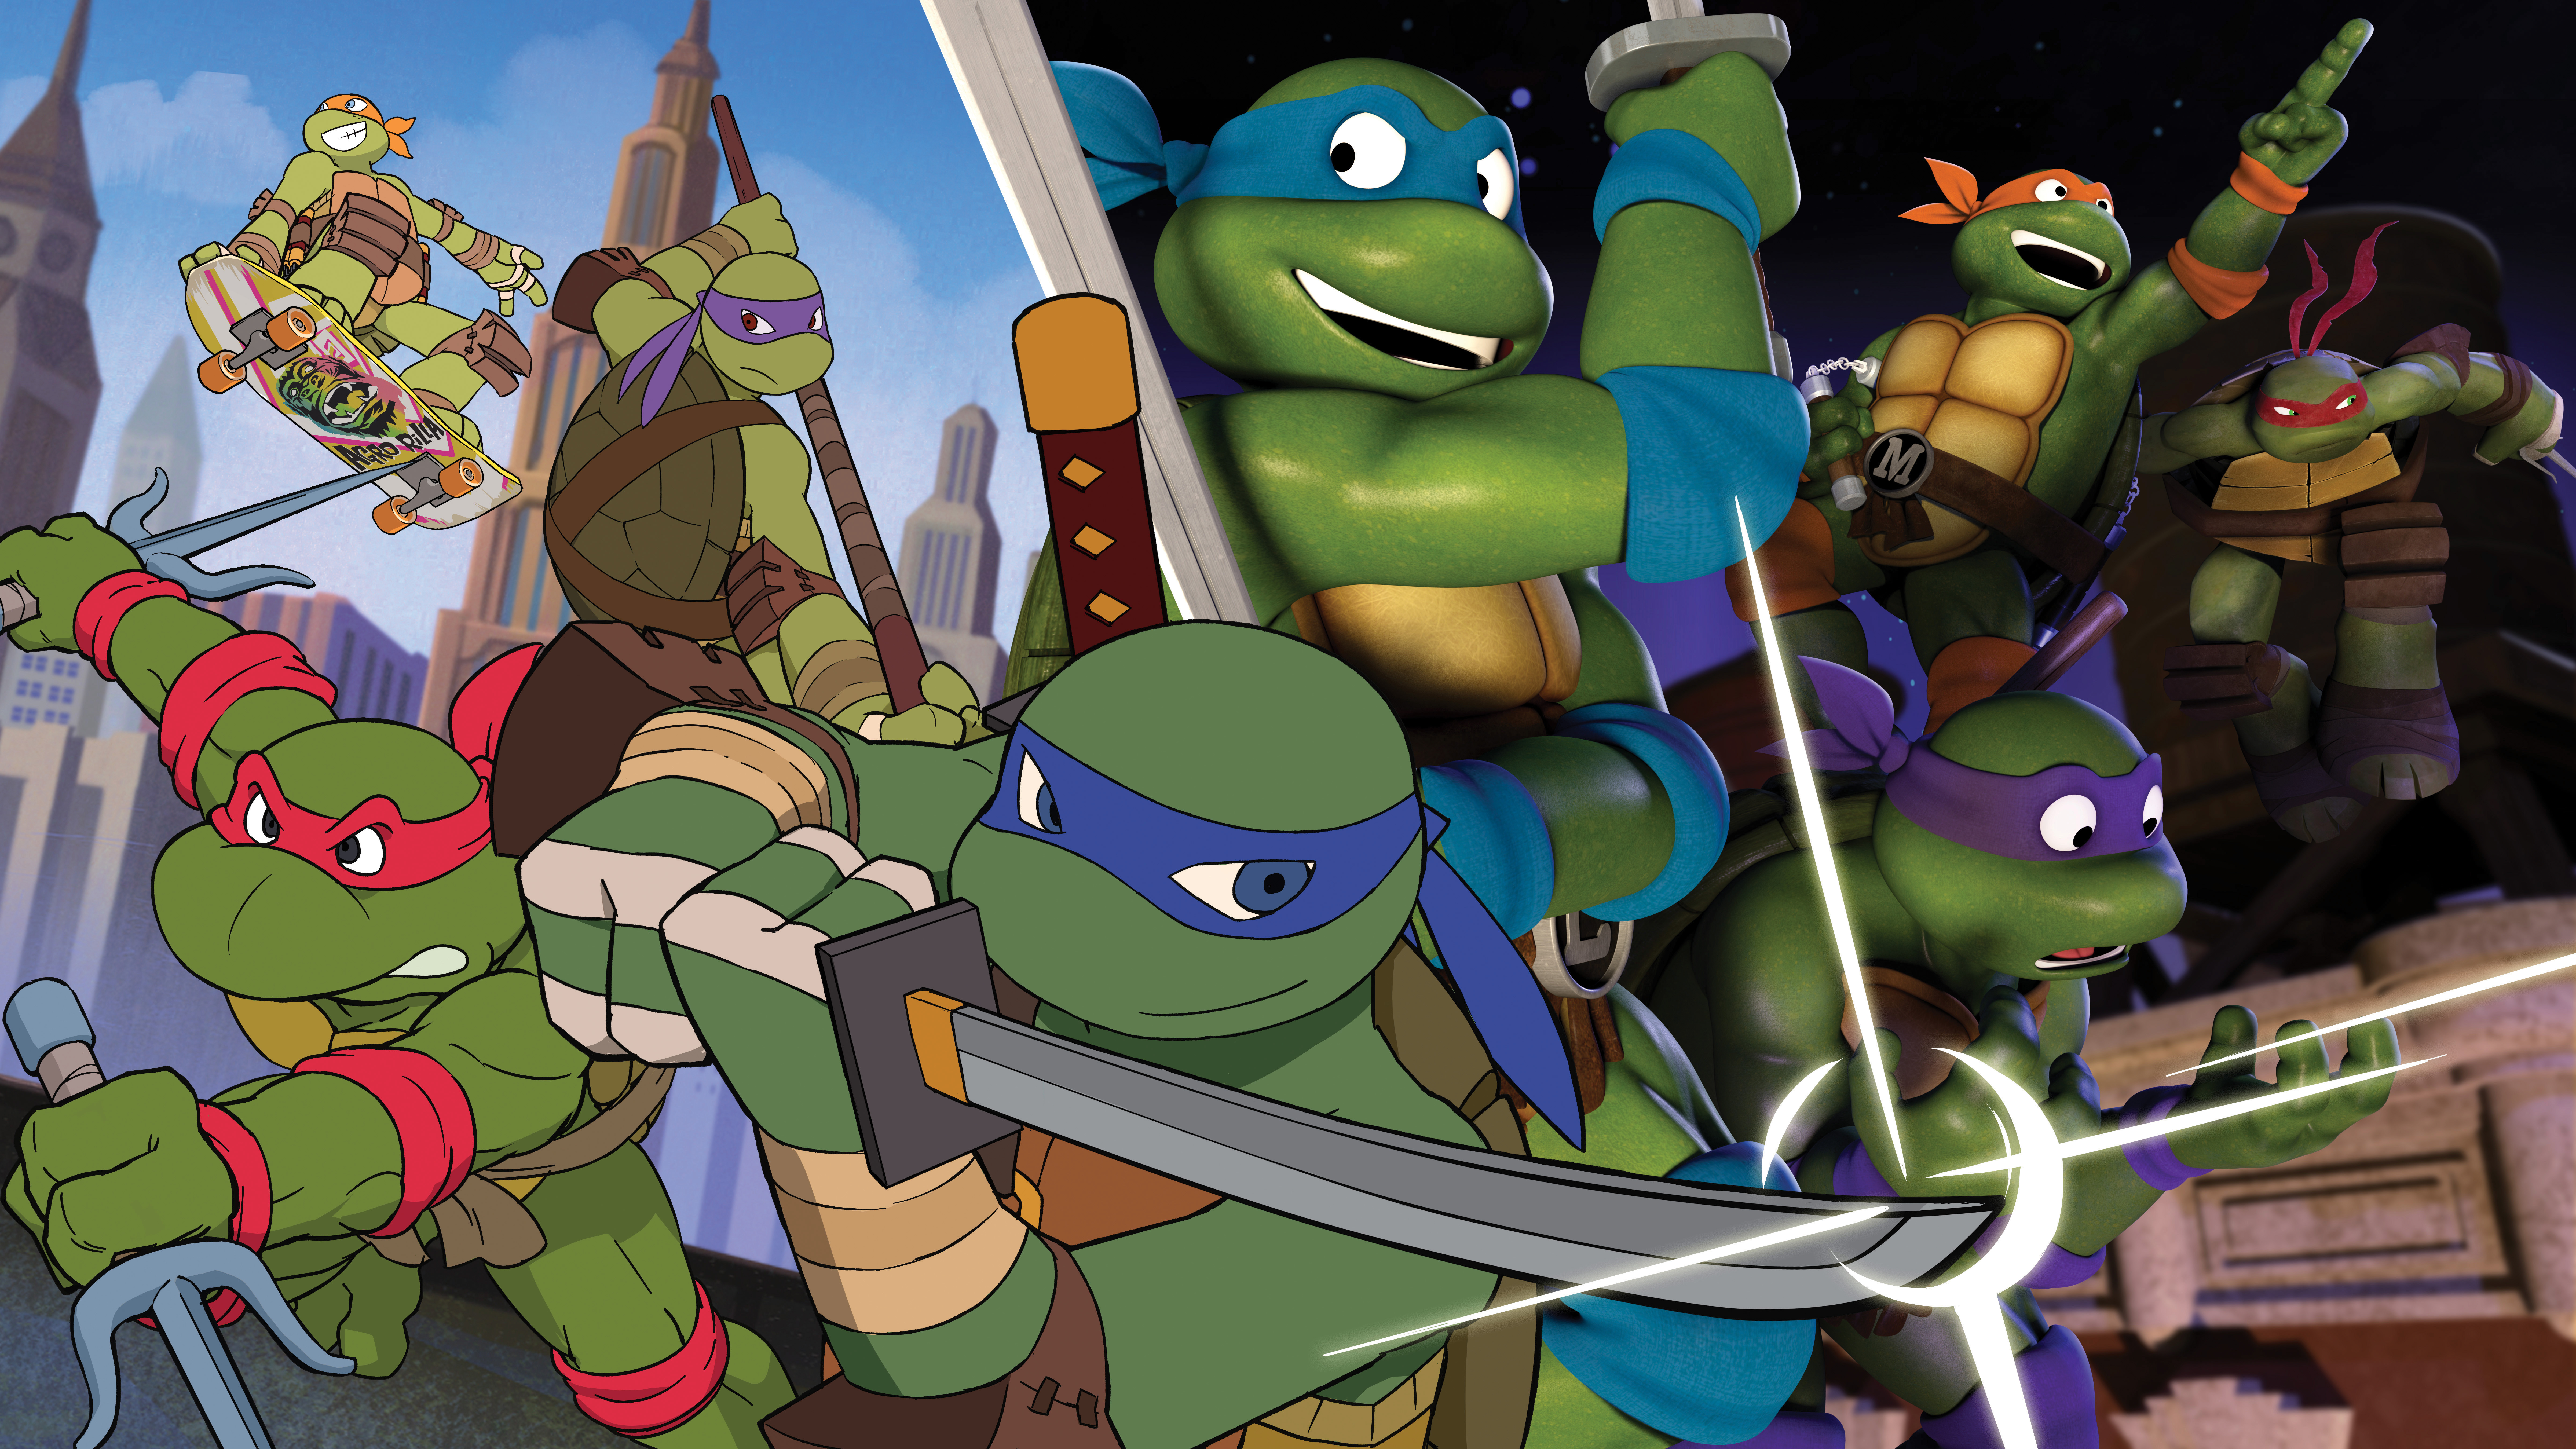 analyse lava Postbode Nickelodeon's Teenage Mutant Ninja Turtles Reunites Original 1980S Turtles  and Krang in Epic Time-Travelling Episode, Sunday, March 27, 11 A.M.  (ET/PT) | Business Wire